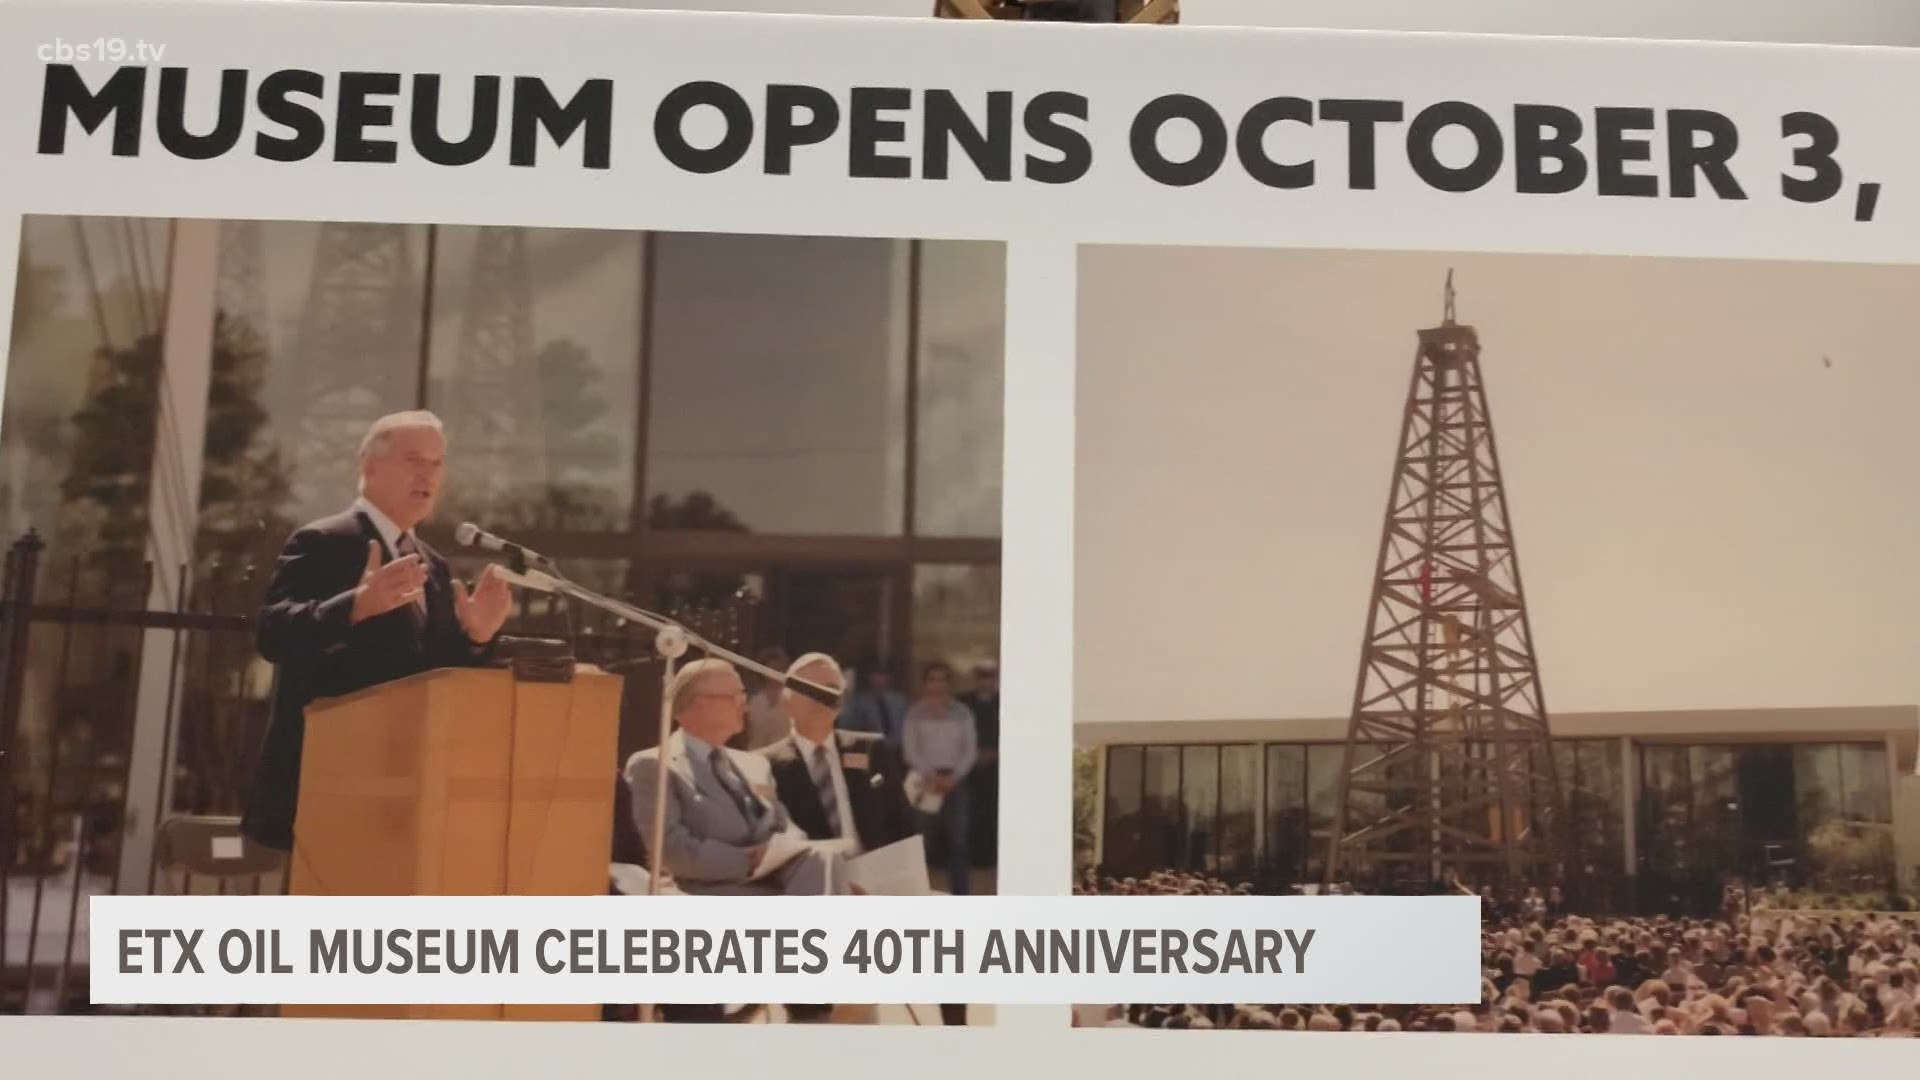 The museum depicts the history of the East Texas Oil Boom. However, the special exhibit talks about the creation of the museum itself.